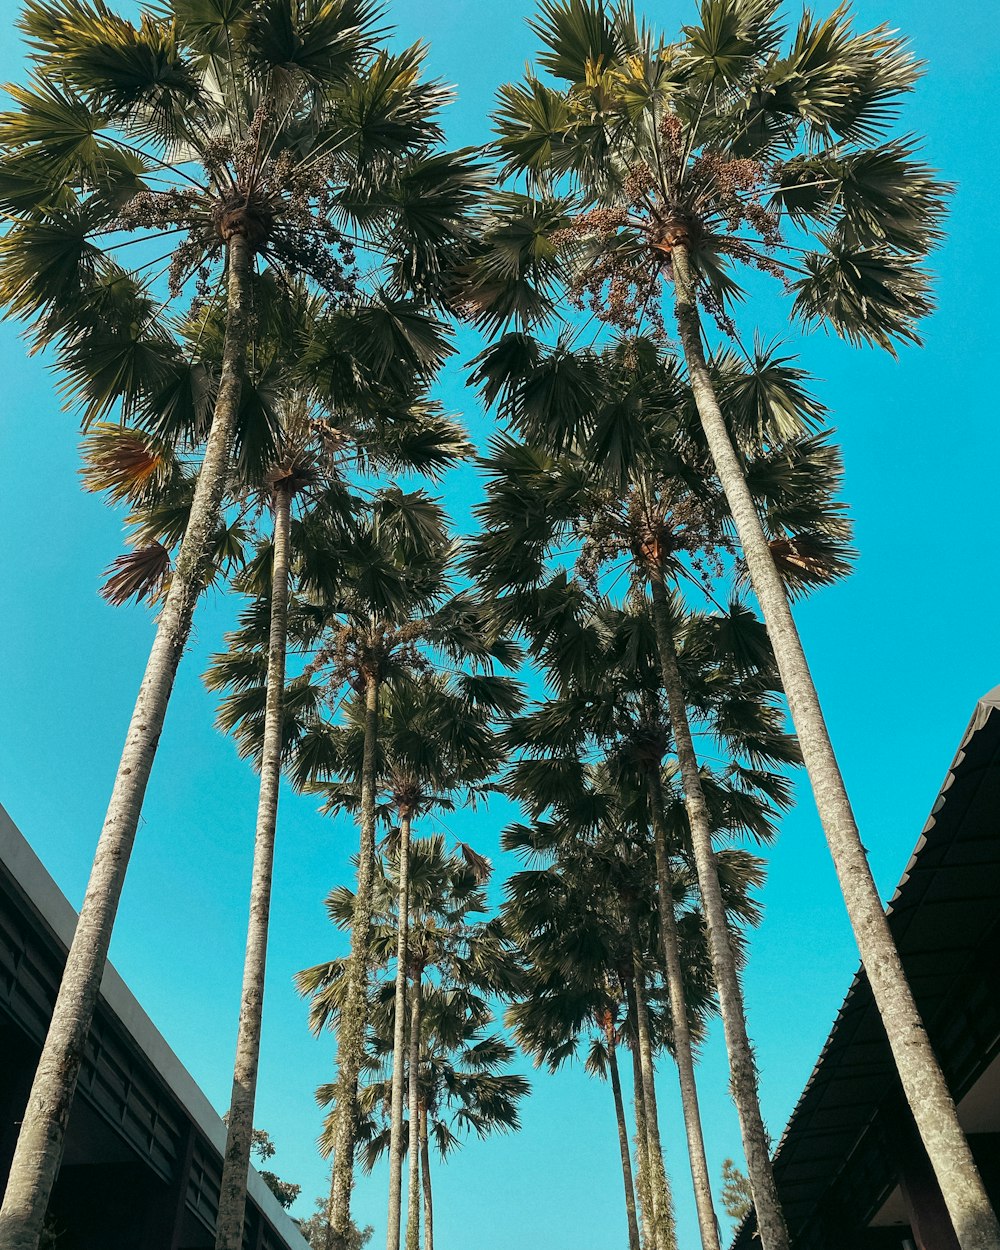 a group of tall palm trees standing next to each other